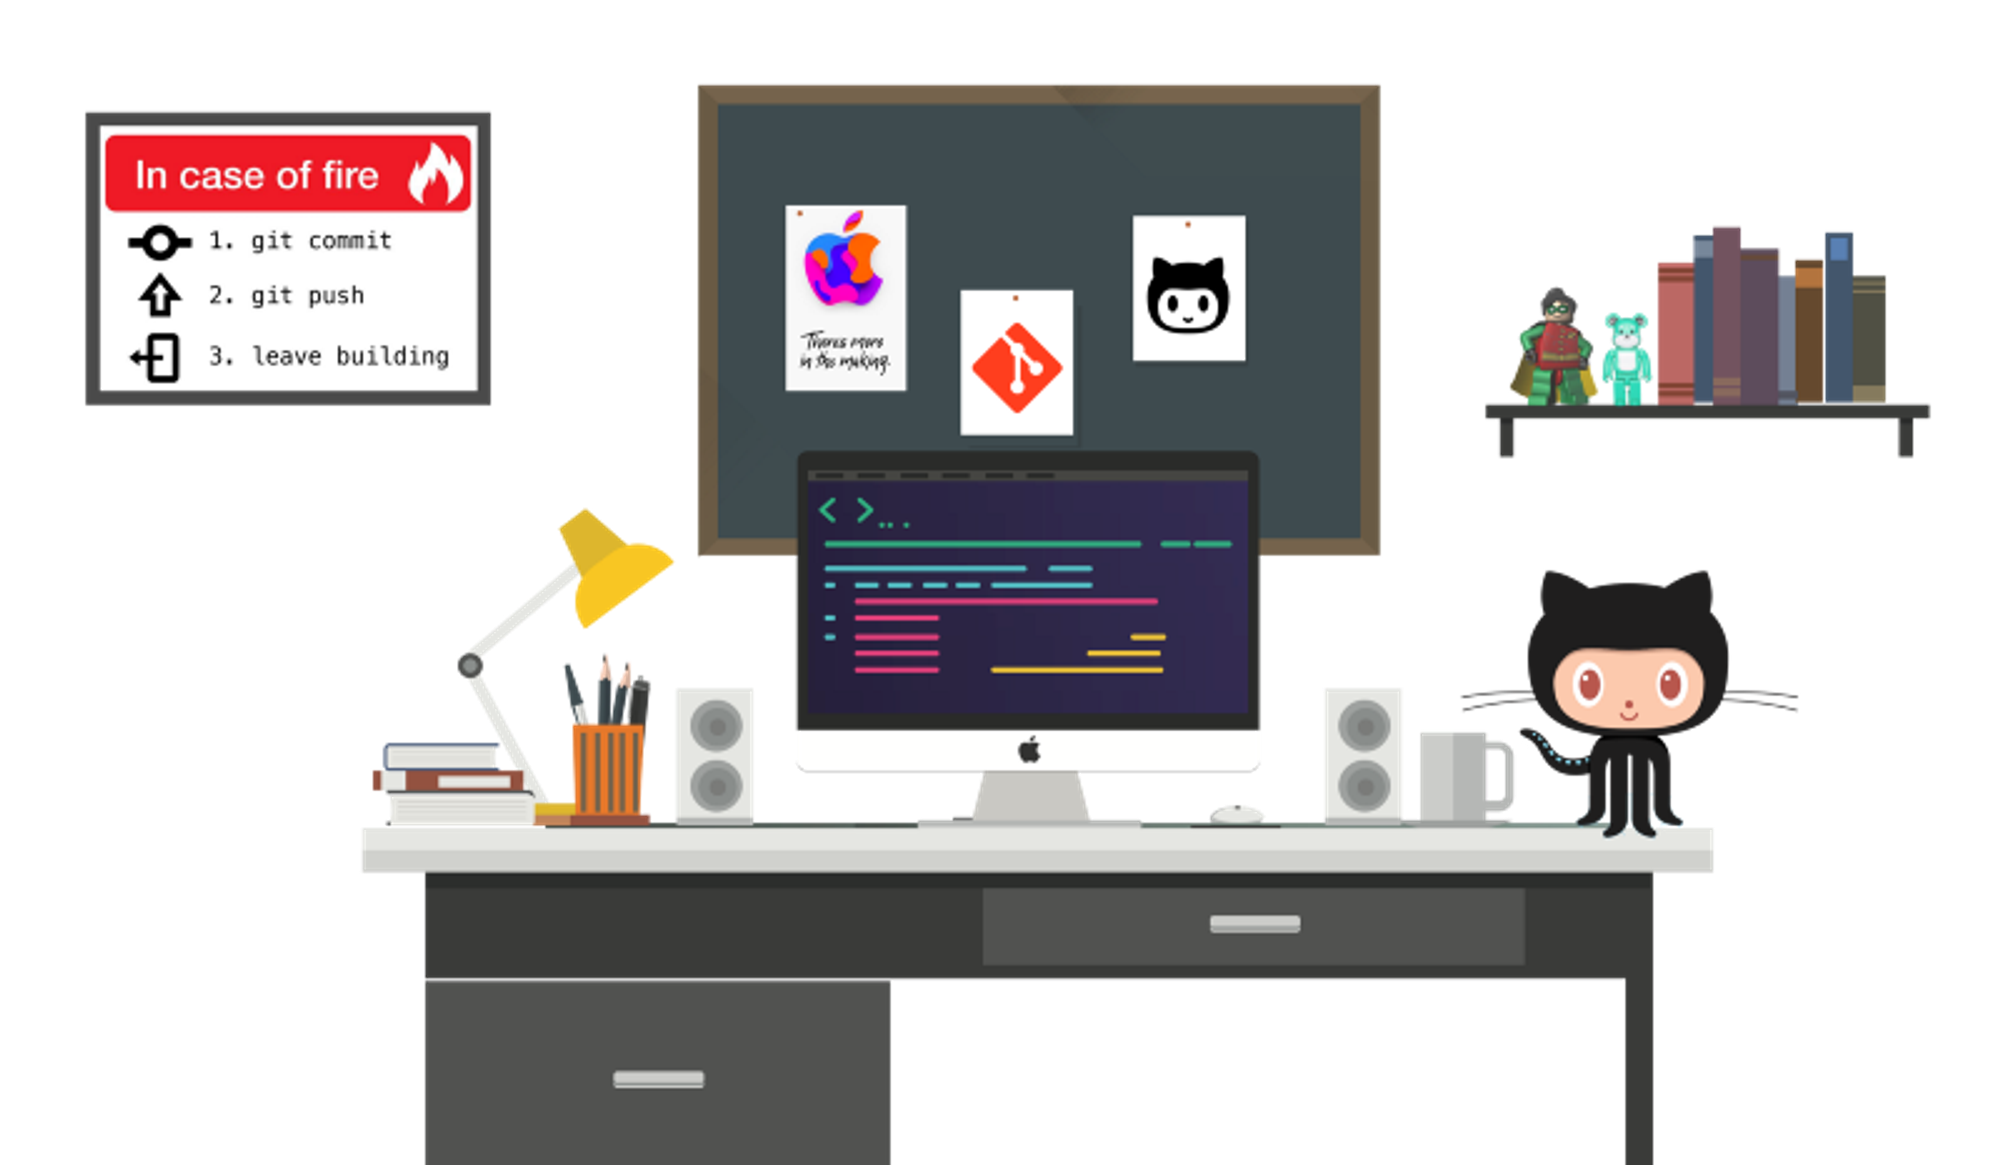 Learn the Basics of Git in Under 10 Minutes